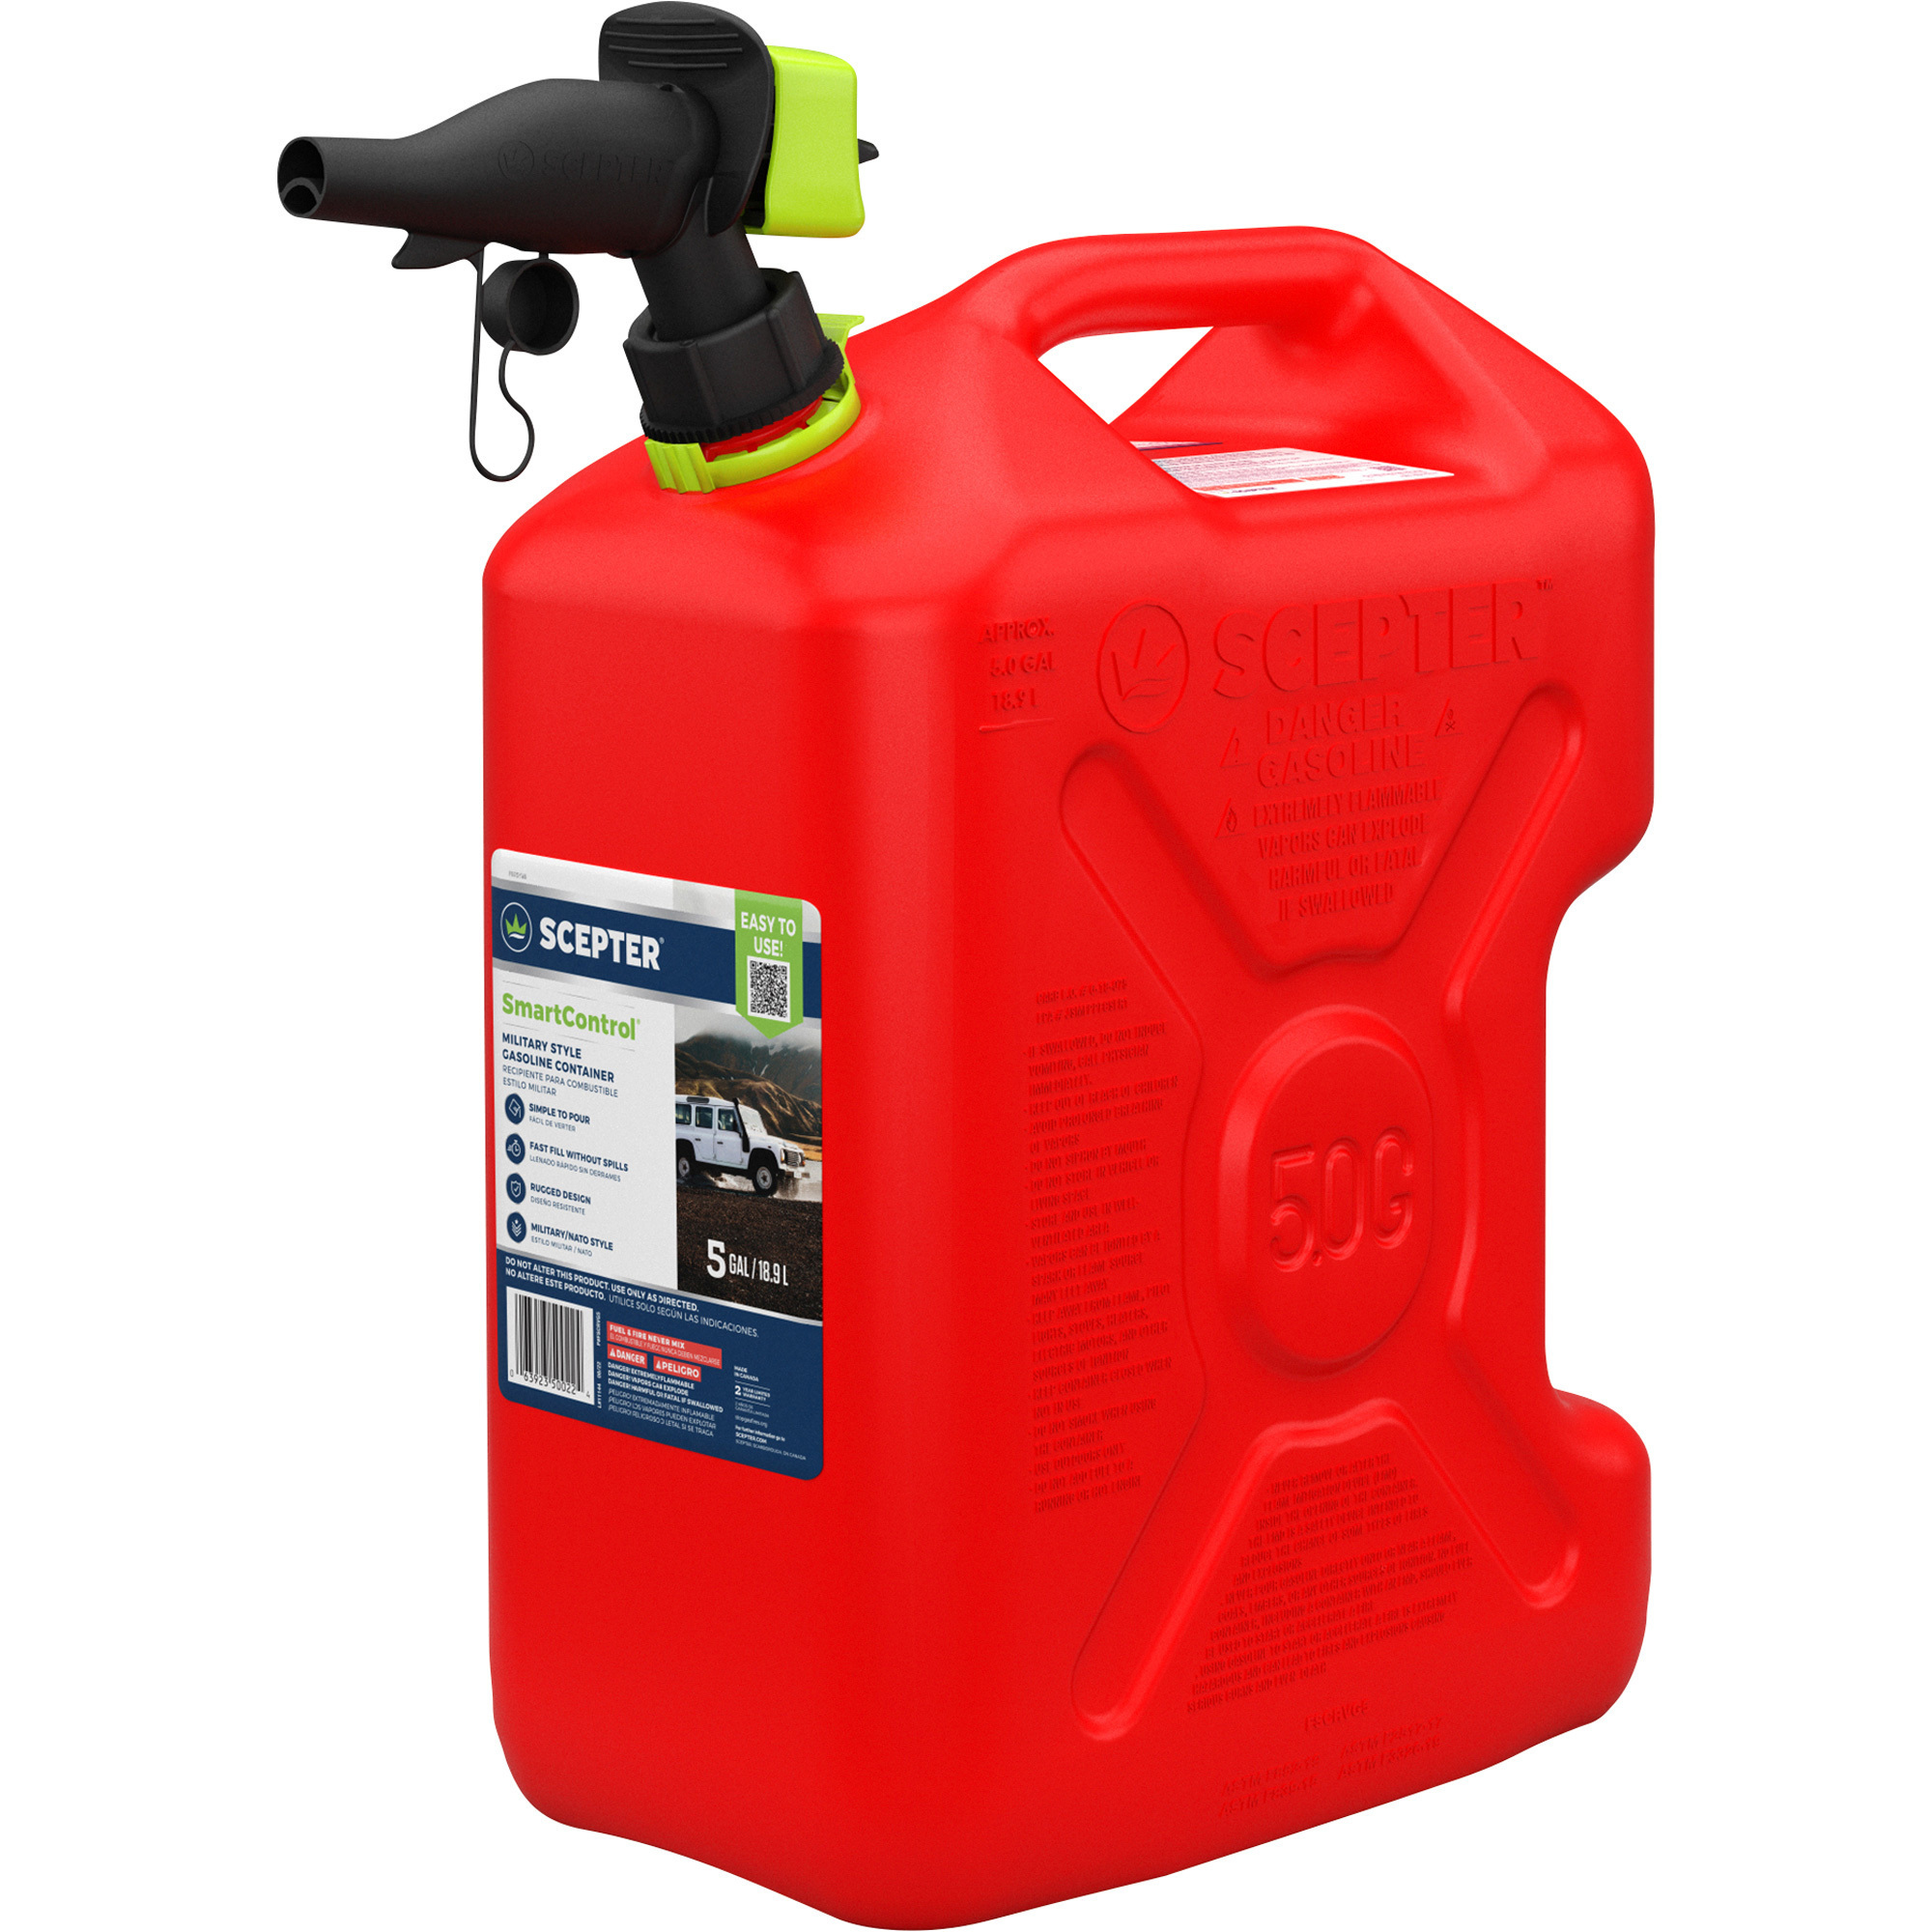 Scepter Military-Style Gas Can with SmartControl Spout, 5 Gallons, Red, Model FSCRVG5